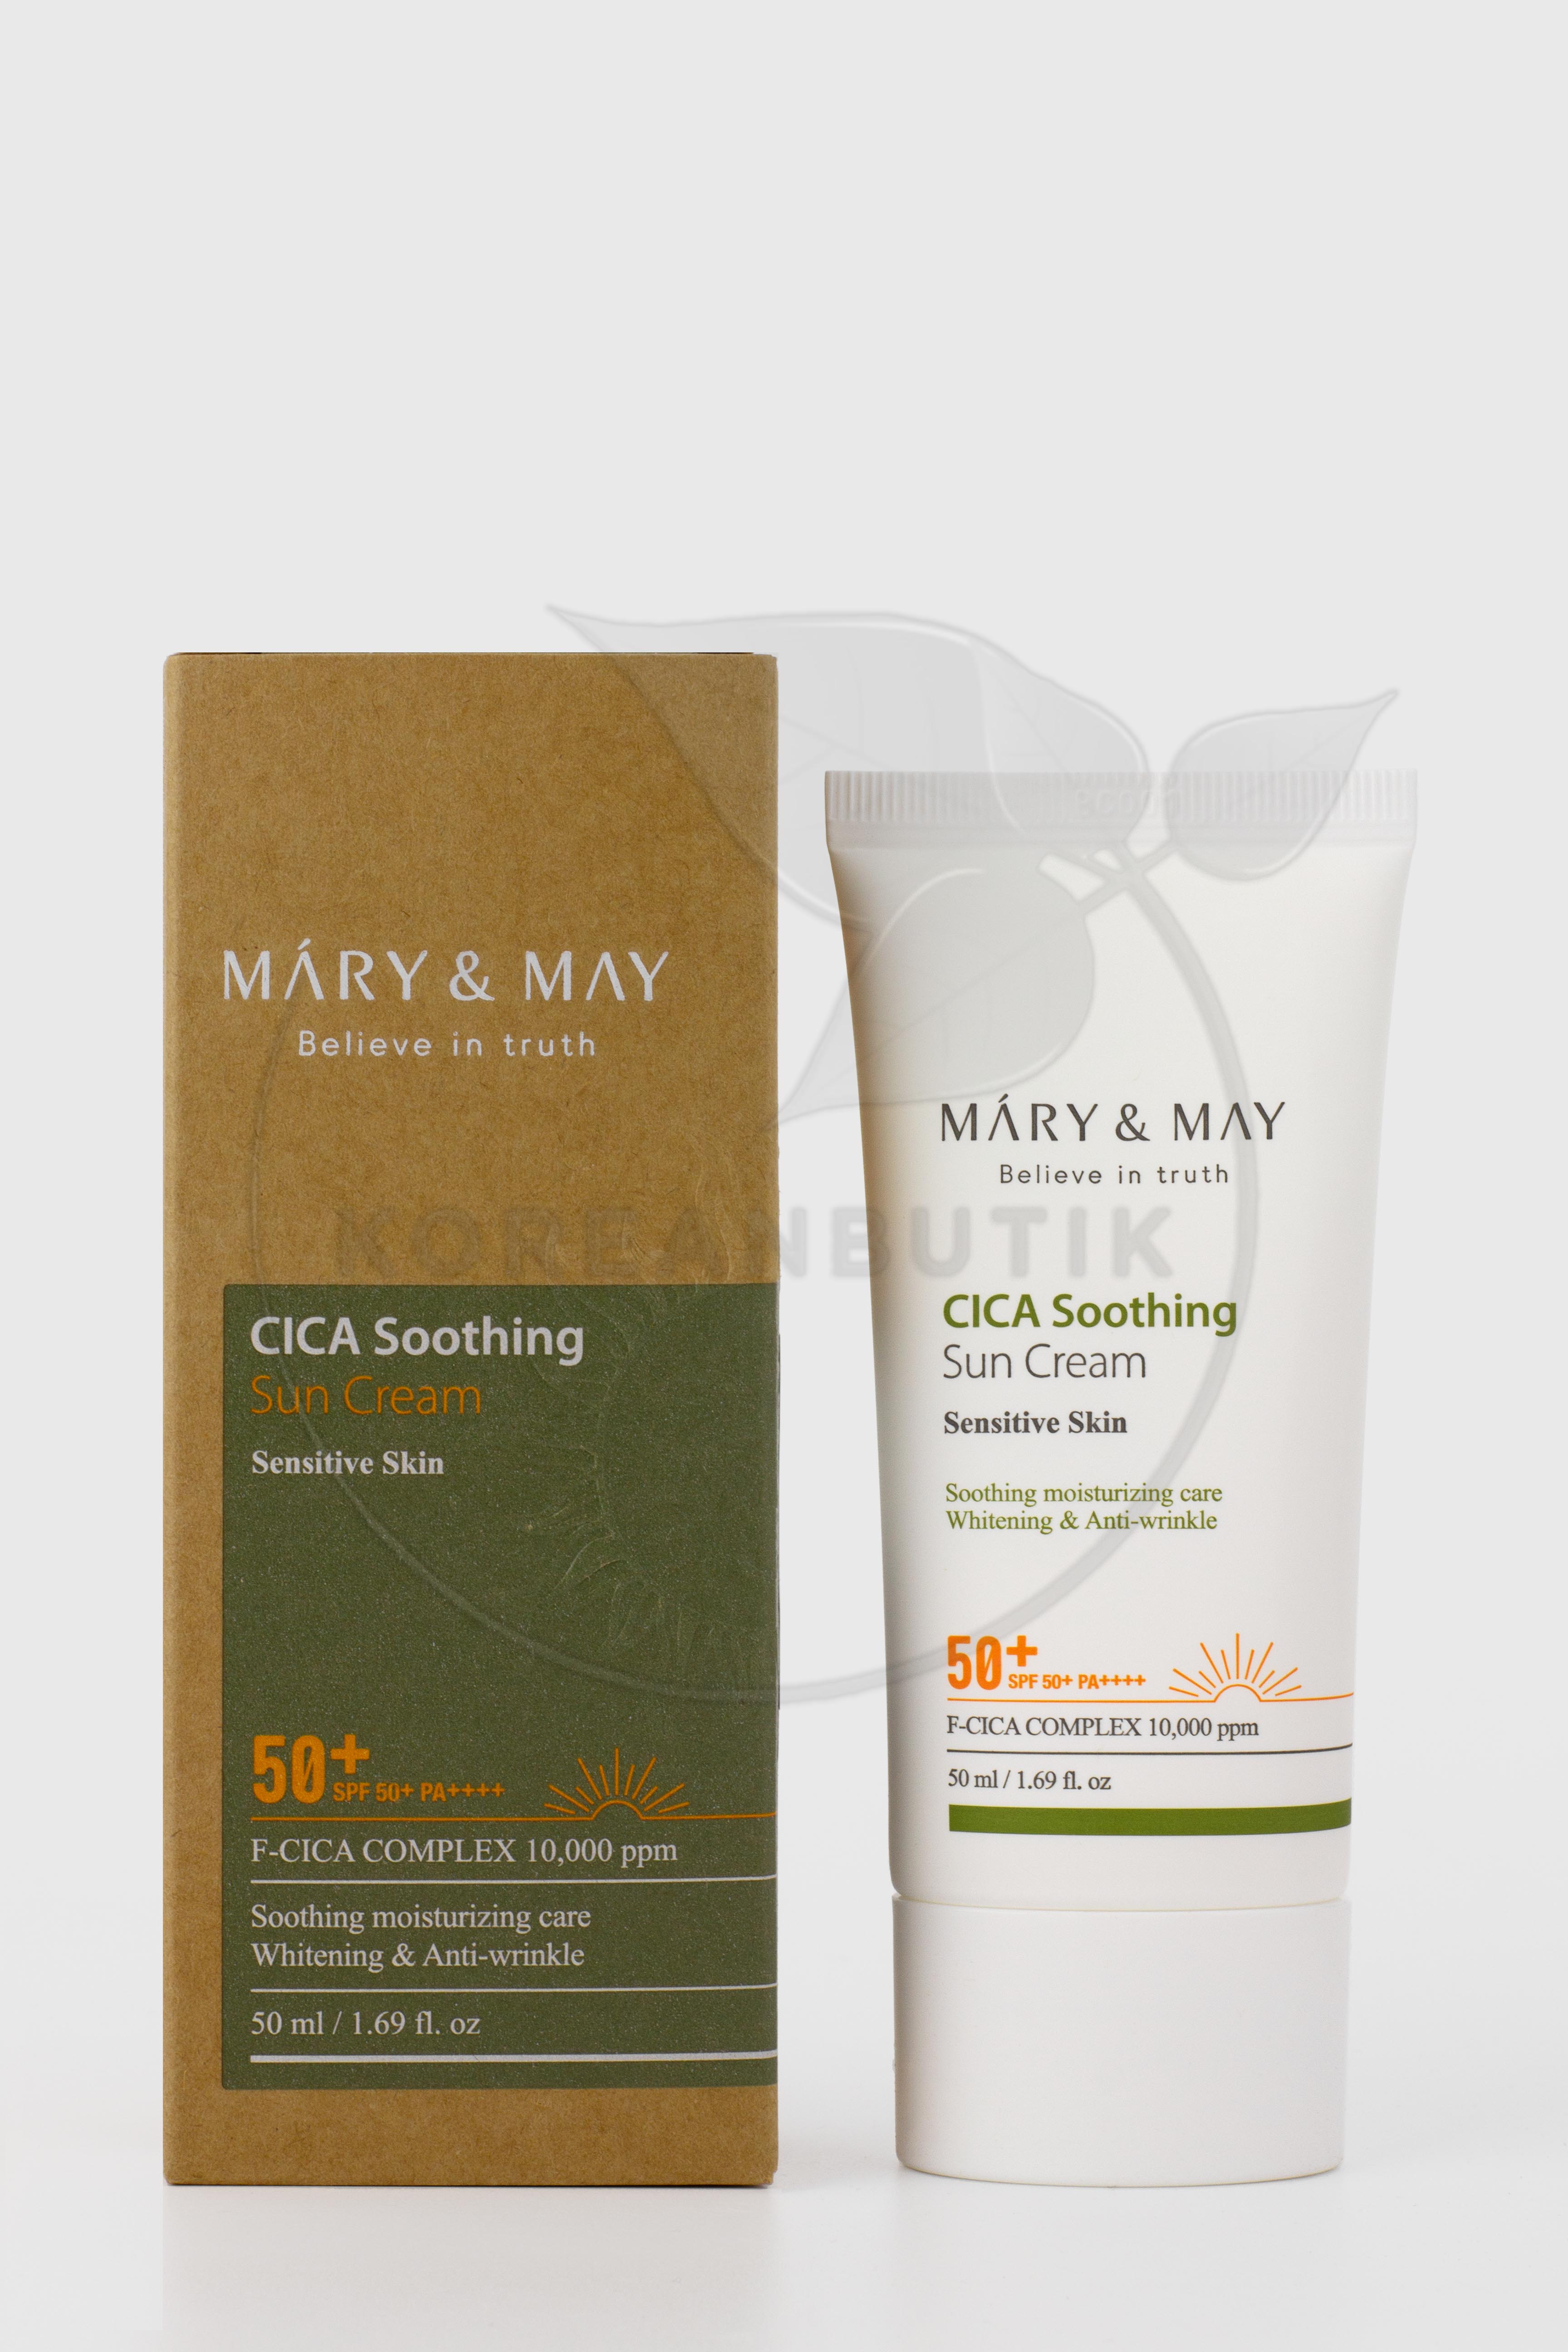  MARY & MAY CICA Soothing Sun Cream SPF50+ PA++++ 50 мл 